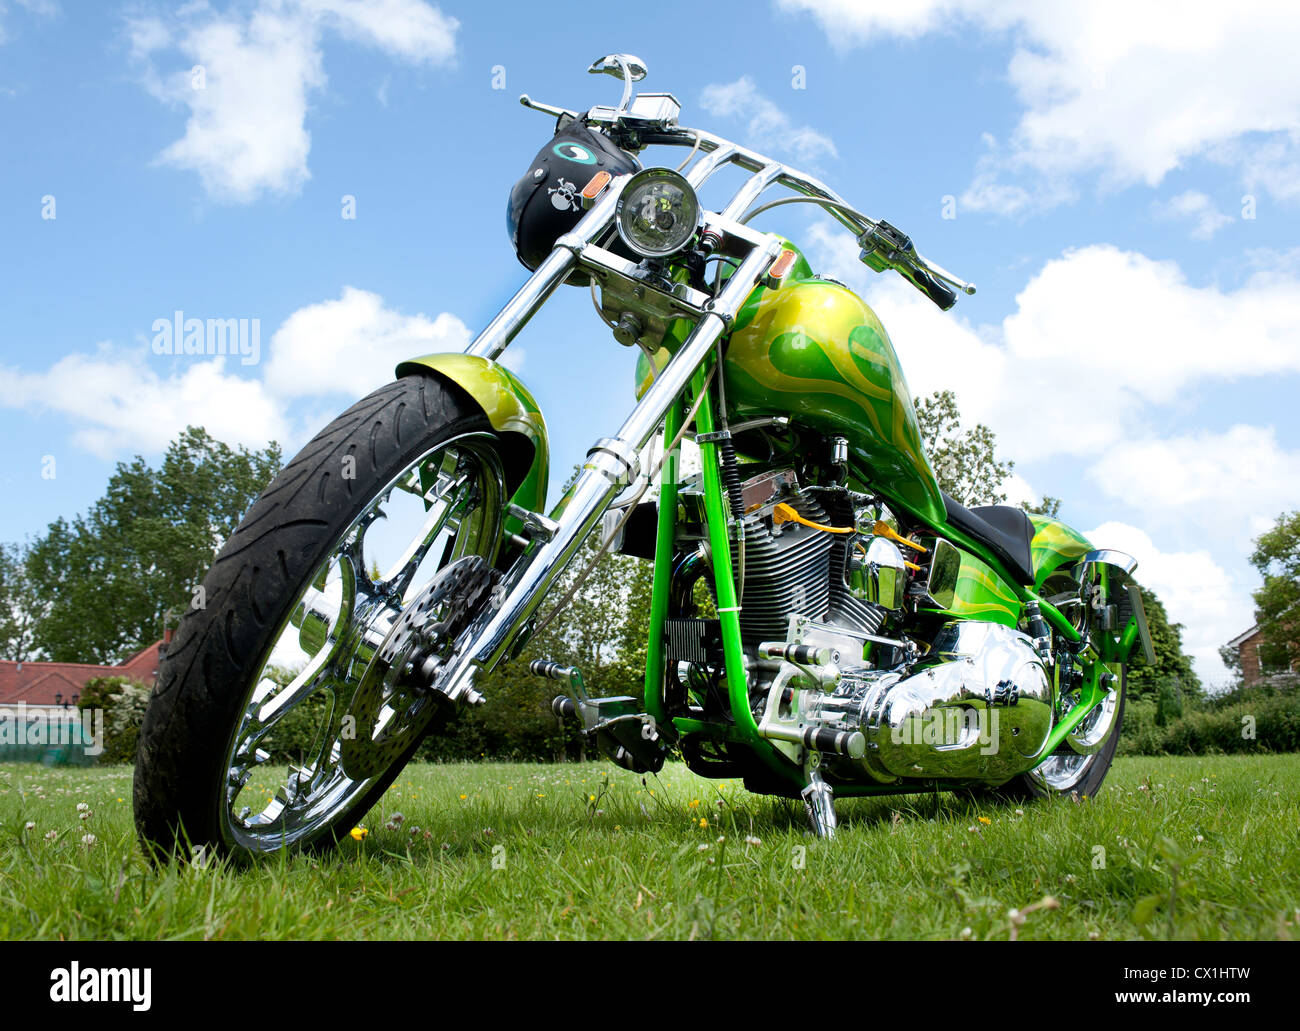 Seen from below a custom painted chopper motorcycle on grass and with chrome finished engine Stock Photo